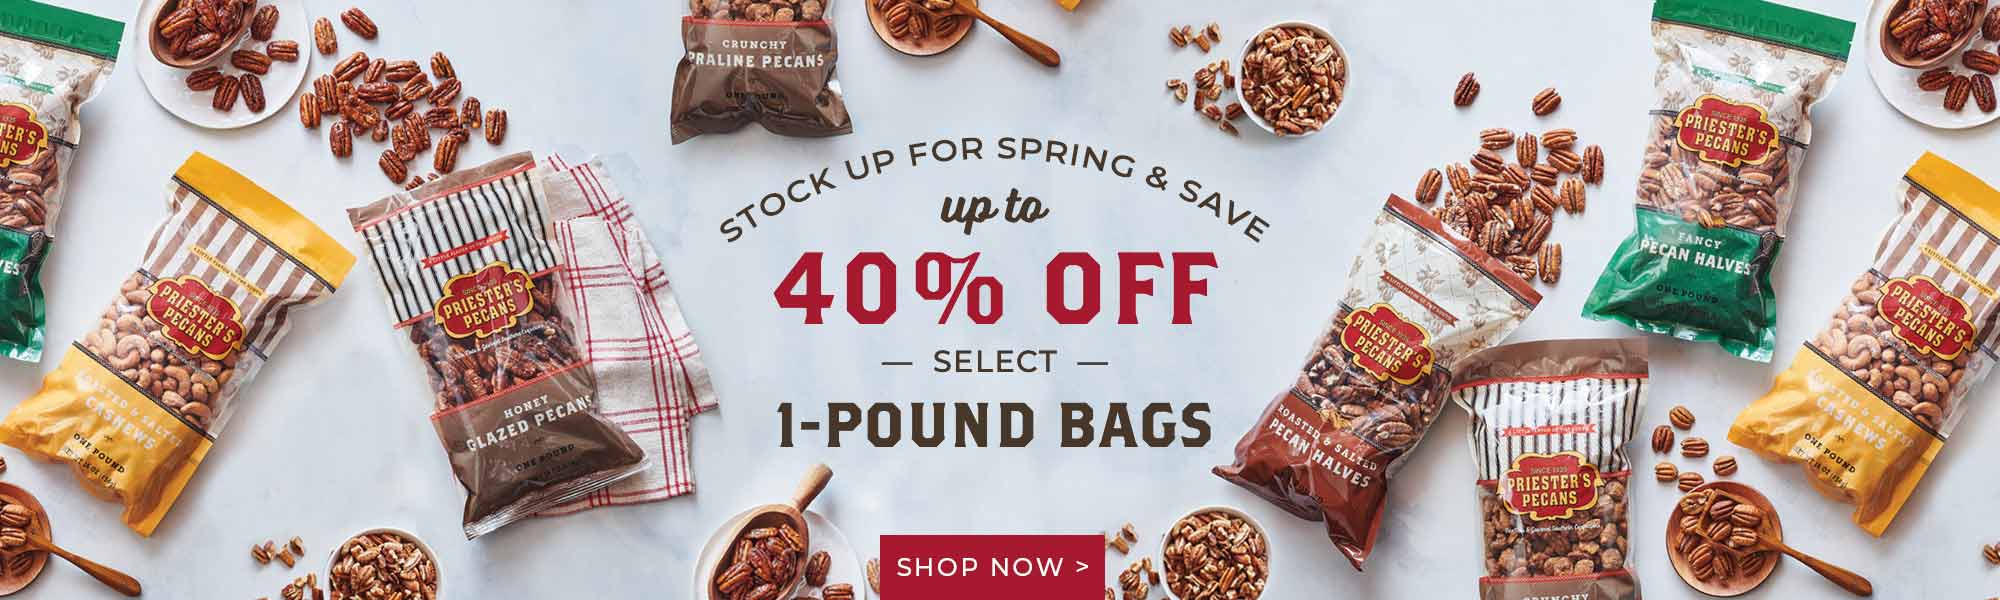 STOCK UP FOR SPRING & SAVE up to 40% OFF select 1-POUND BAGS >